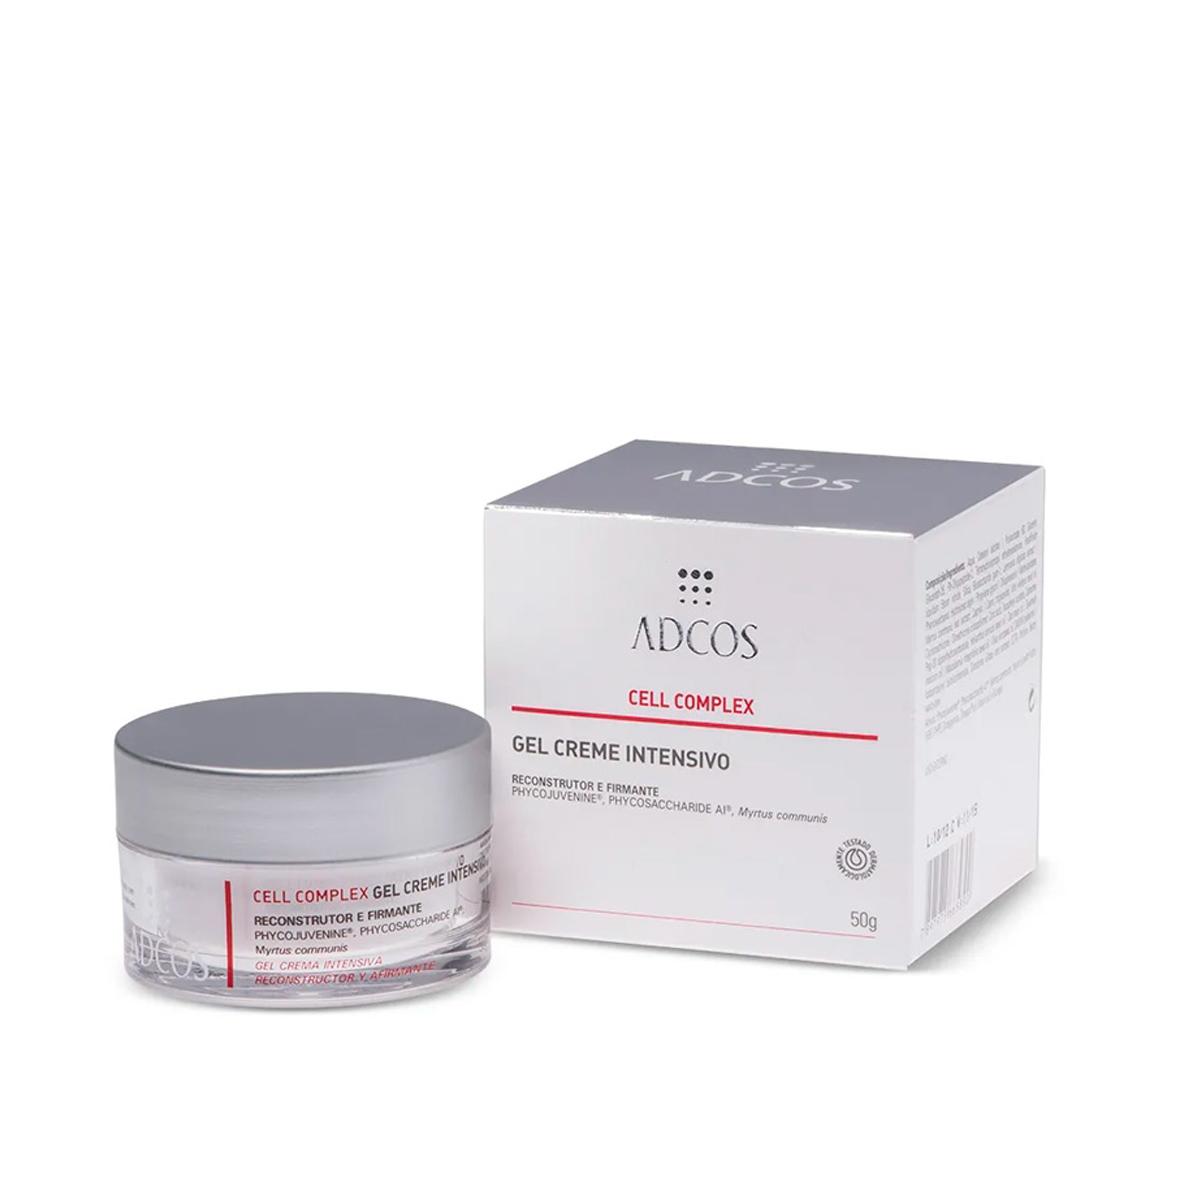 Adcos profissional Cell Complex Gel Creme Intensivo 50g